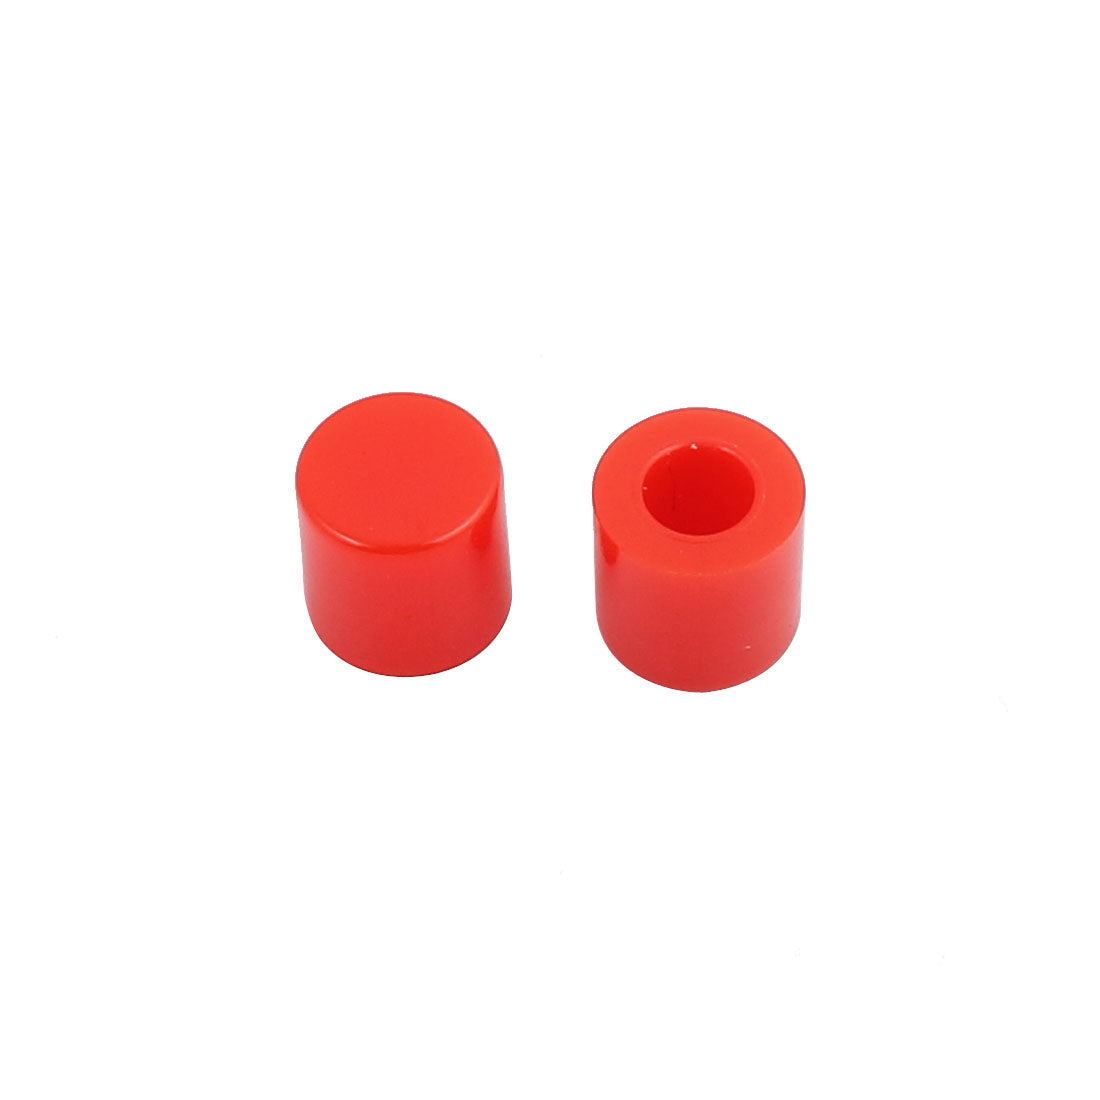 uxcell Uxcell 20Pcs Round Shaped Tactile Button Caps Covers Protector Red for 6x6mm Tact Switch